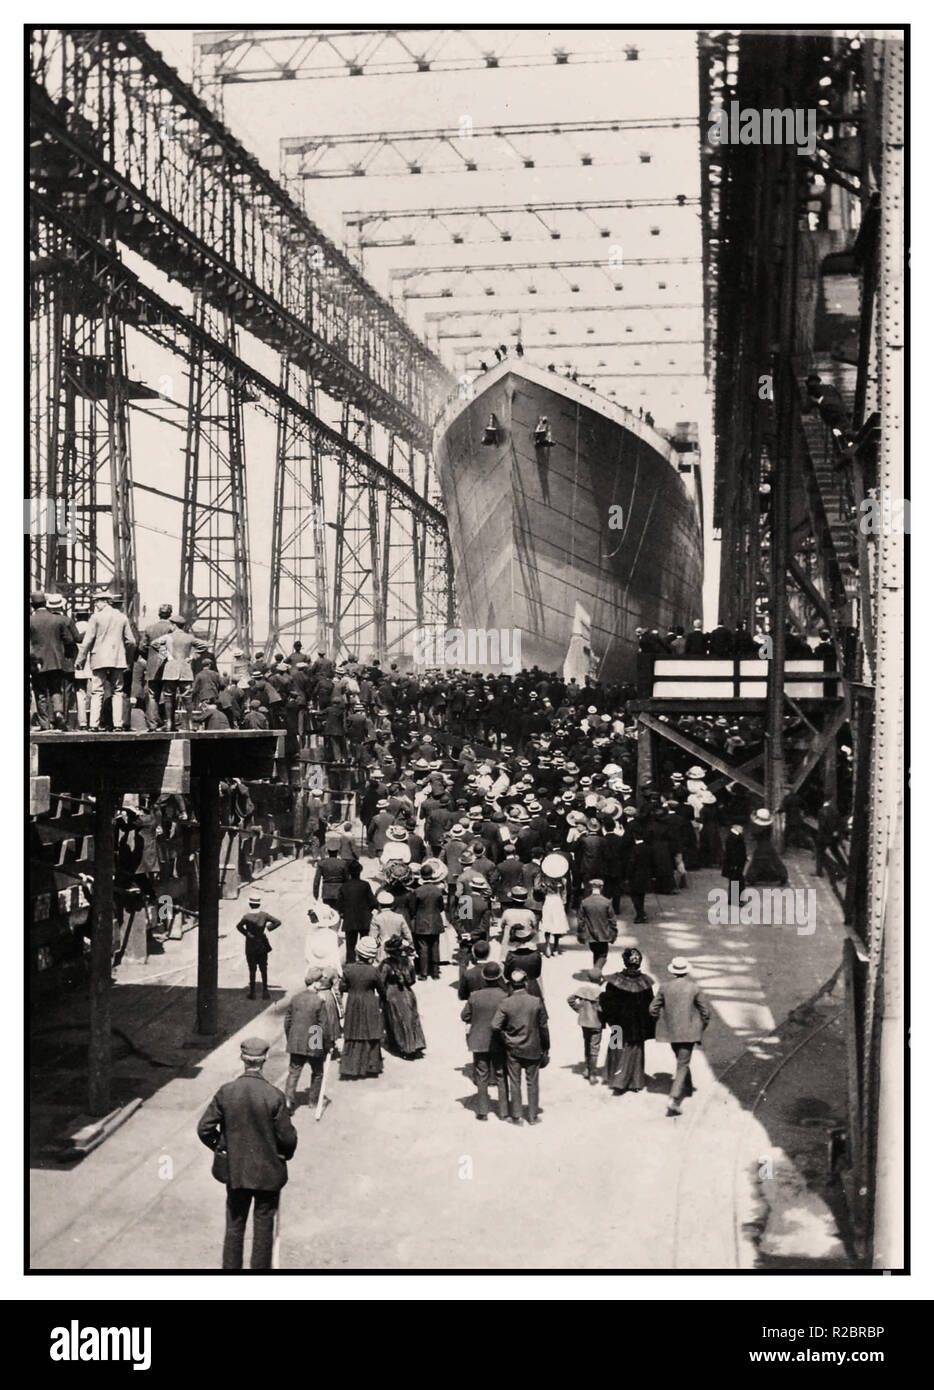 TITANIC LAUNCH 1911  SLIPWAY Launching of RMS Titanic with crowds of invited guests at Harland & Wolff shipyards Northern Ireland 31st May 1911 Stock Photo